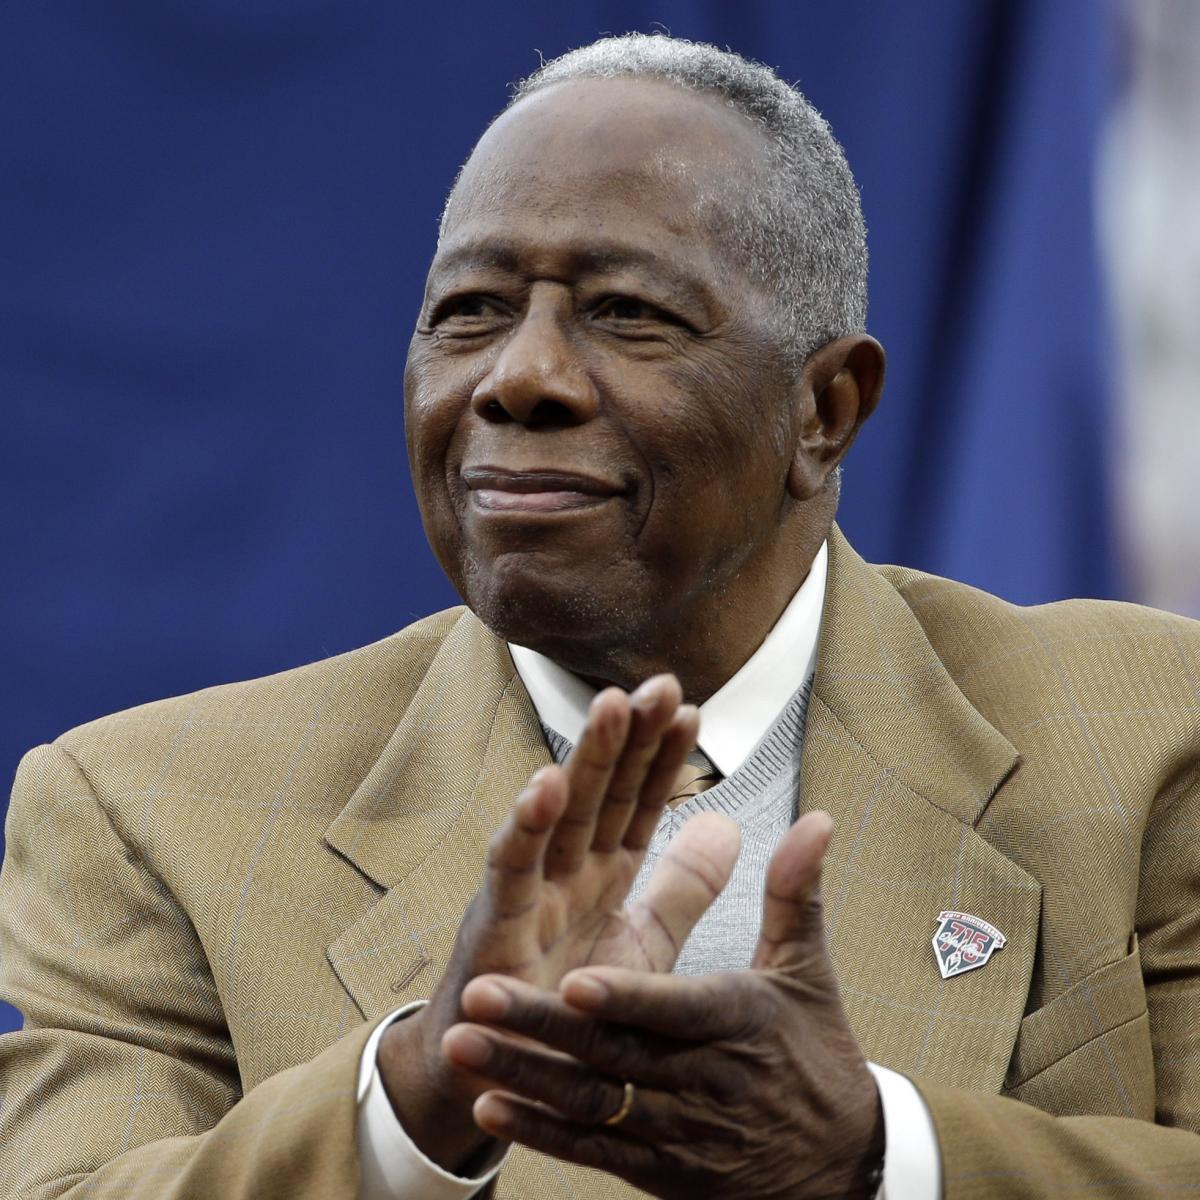 Hank Aaron 1954 Rookie Card Sells for $170,000 at Auction